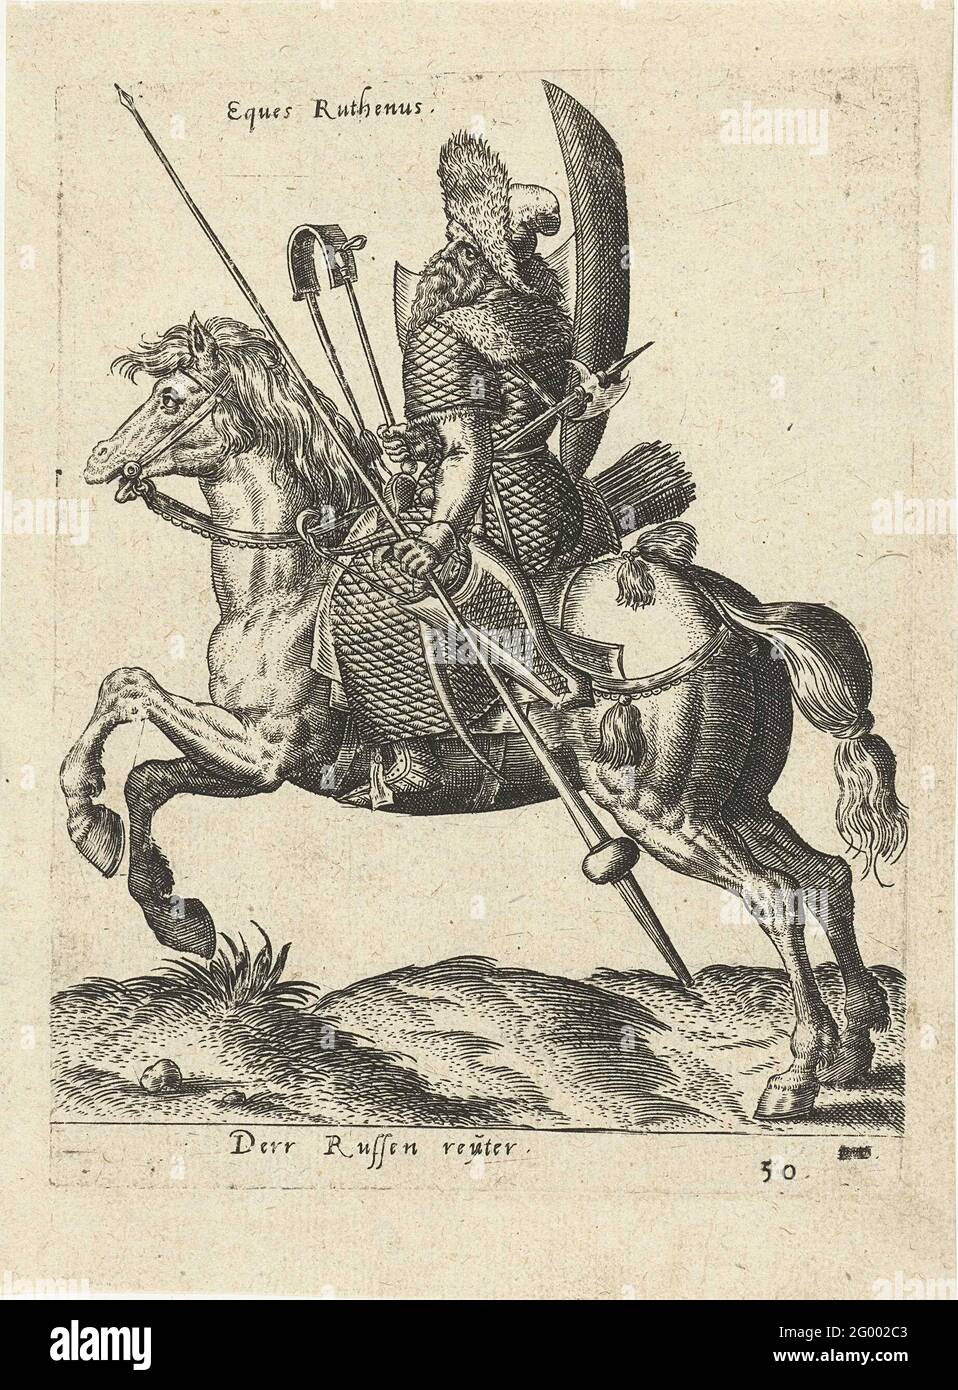 Russian rider; Diversarum Gentium Armatura Equestris. Horse and rider to the left. The horse is in gallop. The rider is dressed russically and has a spear in his hands. The print has a German caption and Latin inscription. Print originally from 'Equitum descripcio ...', 1577. Stock Photo